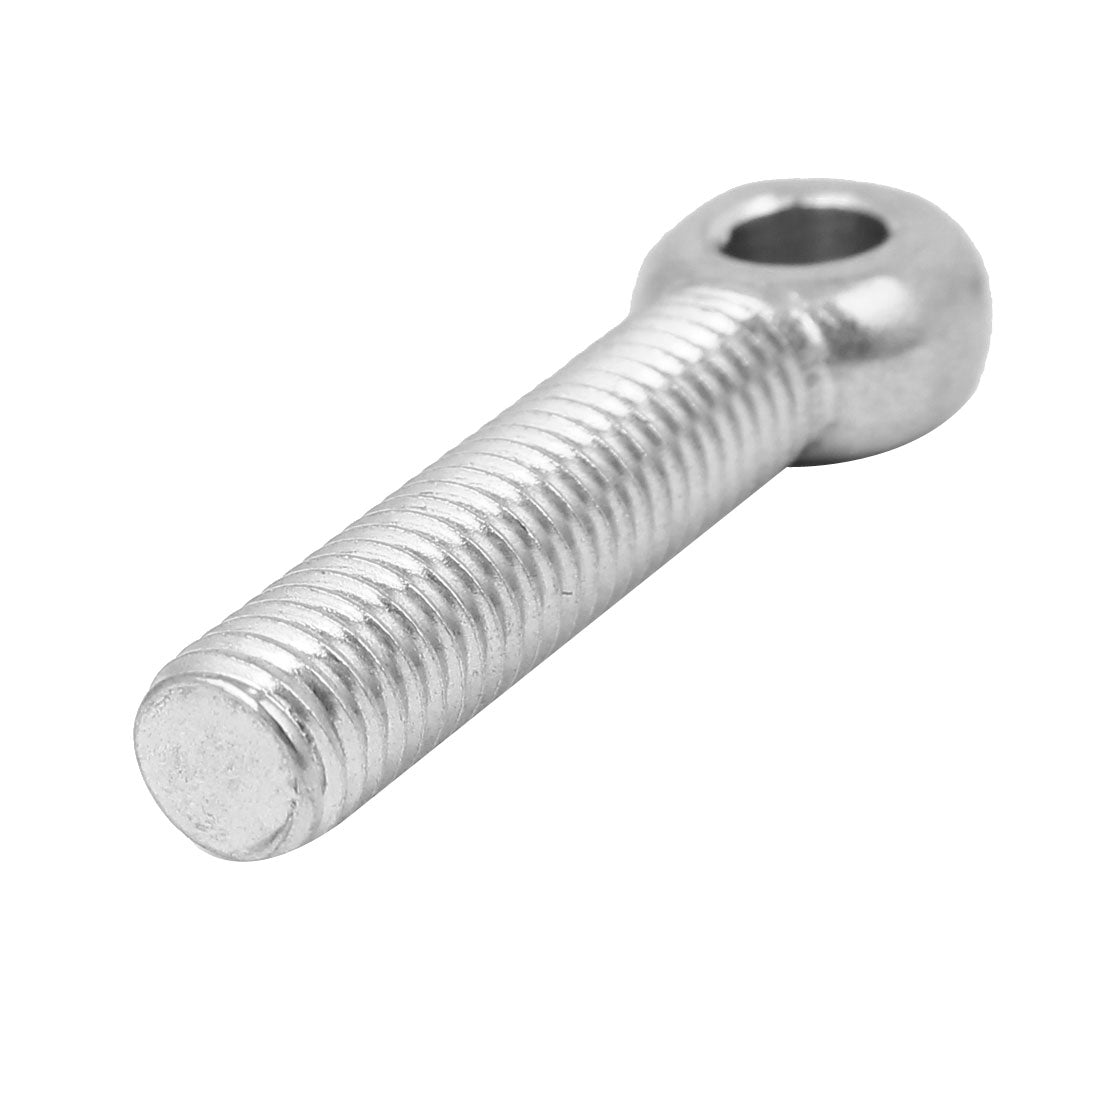 uxcell Uxcell M8 x 40mm 304 Stainless Steel Machine Shoulder Lift Eye Bolt Rigging 12pcs